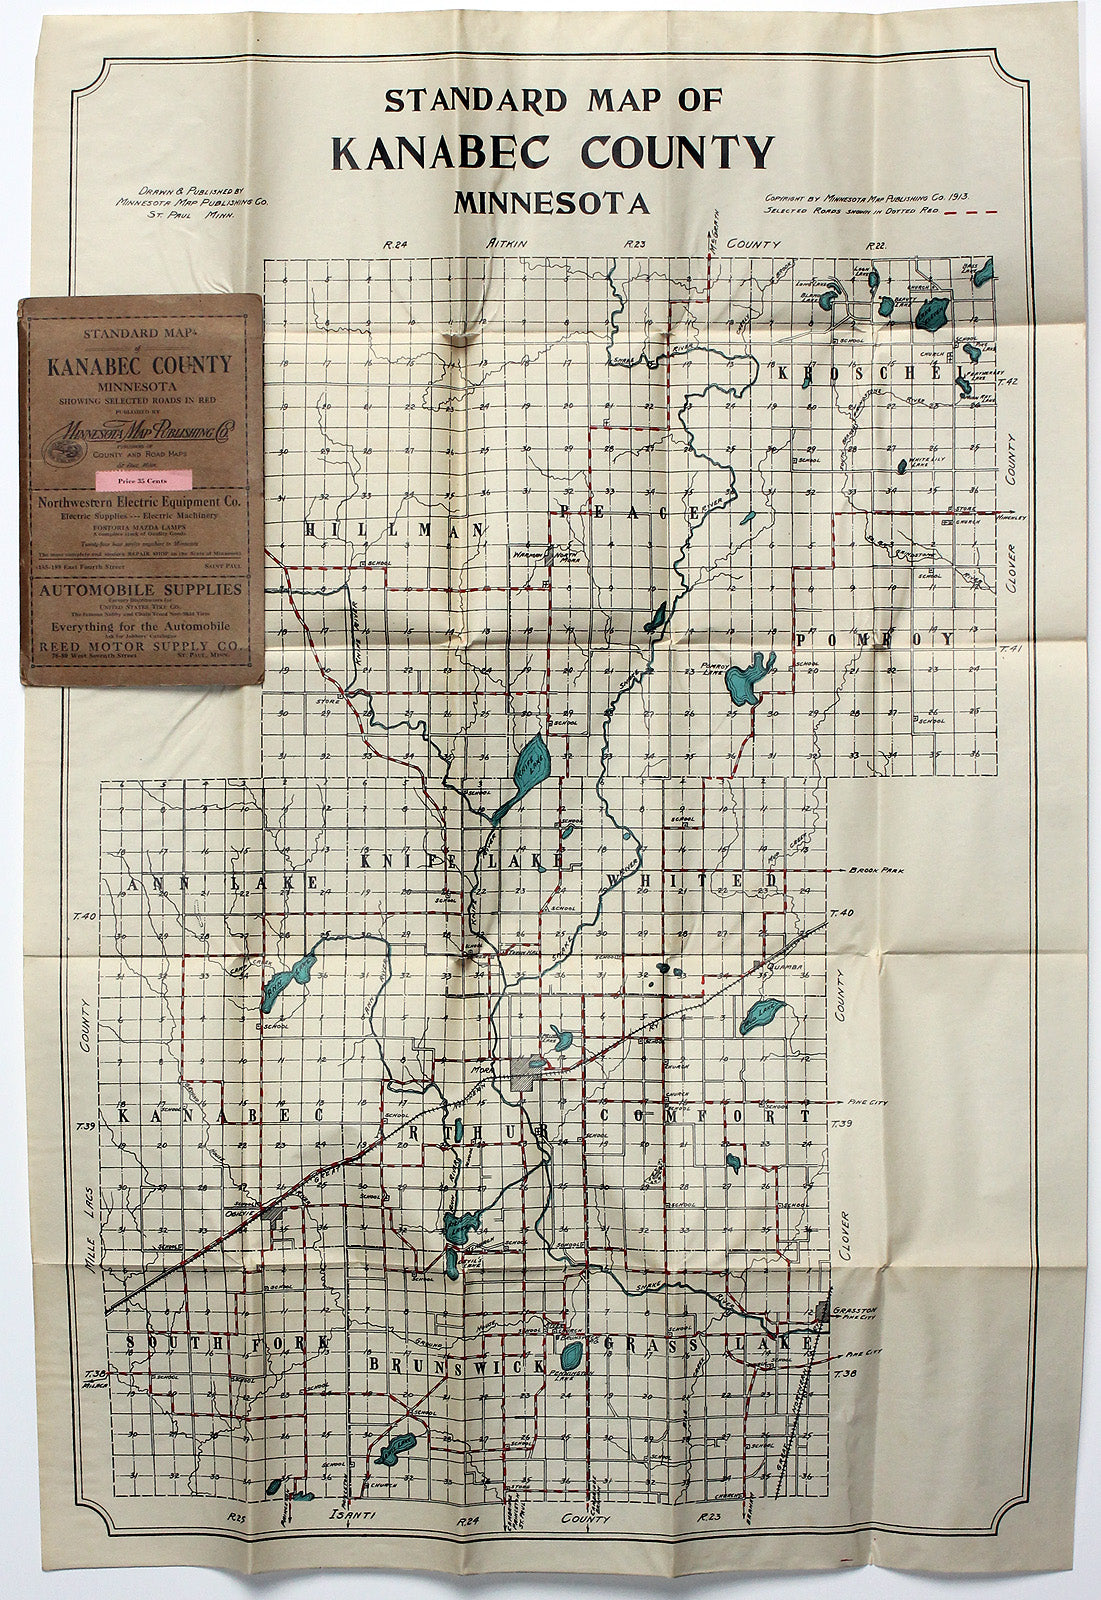 (MN - Kanabec County) Standard Map of Kanabec County...